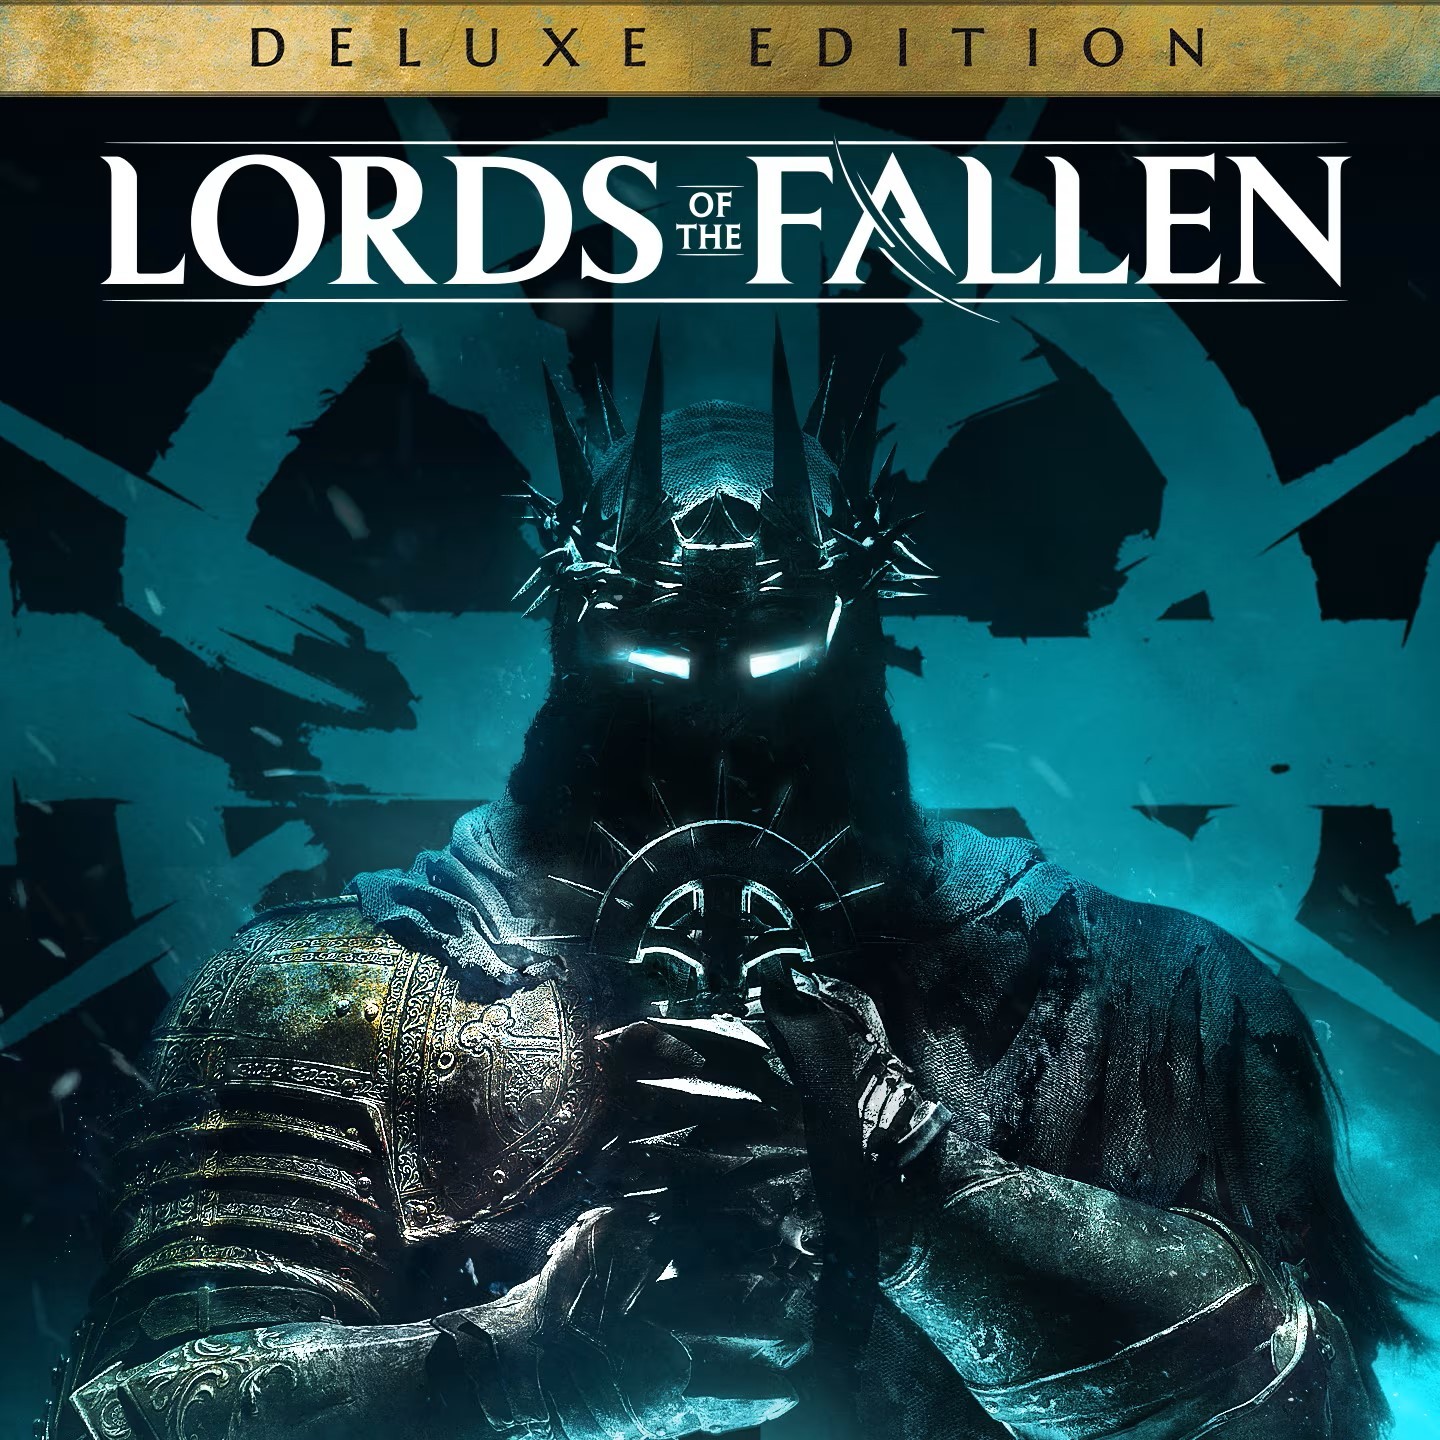 Lords Of The Fallen Limited Edition - Midia Fisica